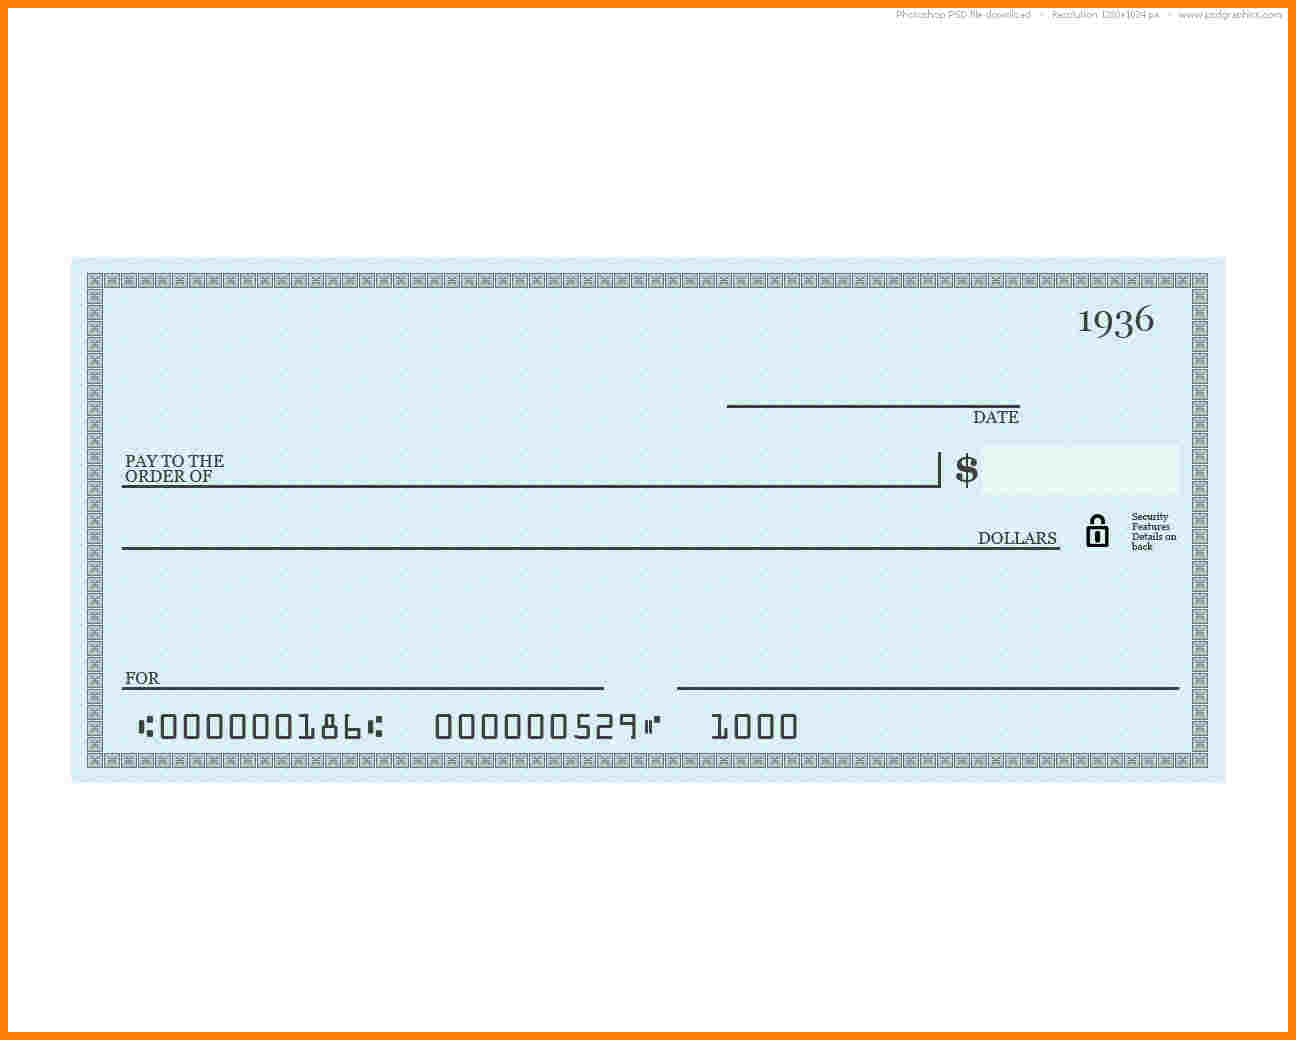 Download Free Payroll Check Templates - softisei With Regard To Blank Pay Stub Template Word